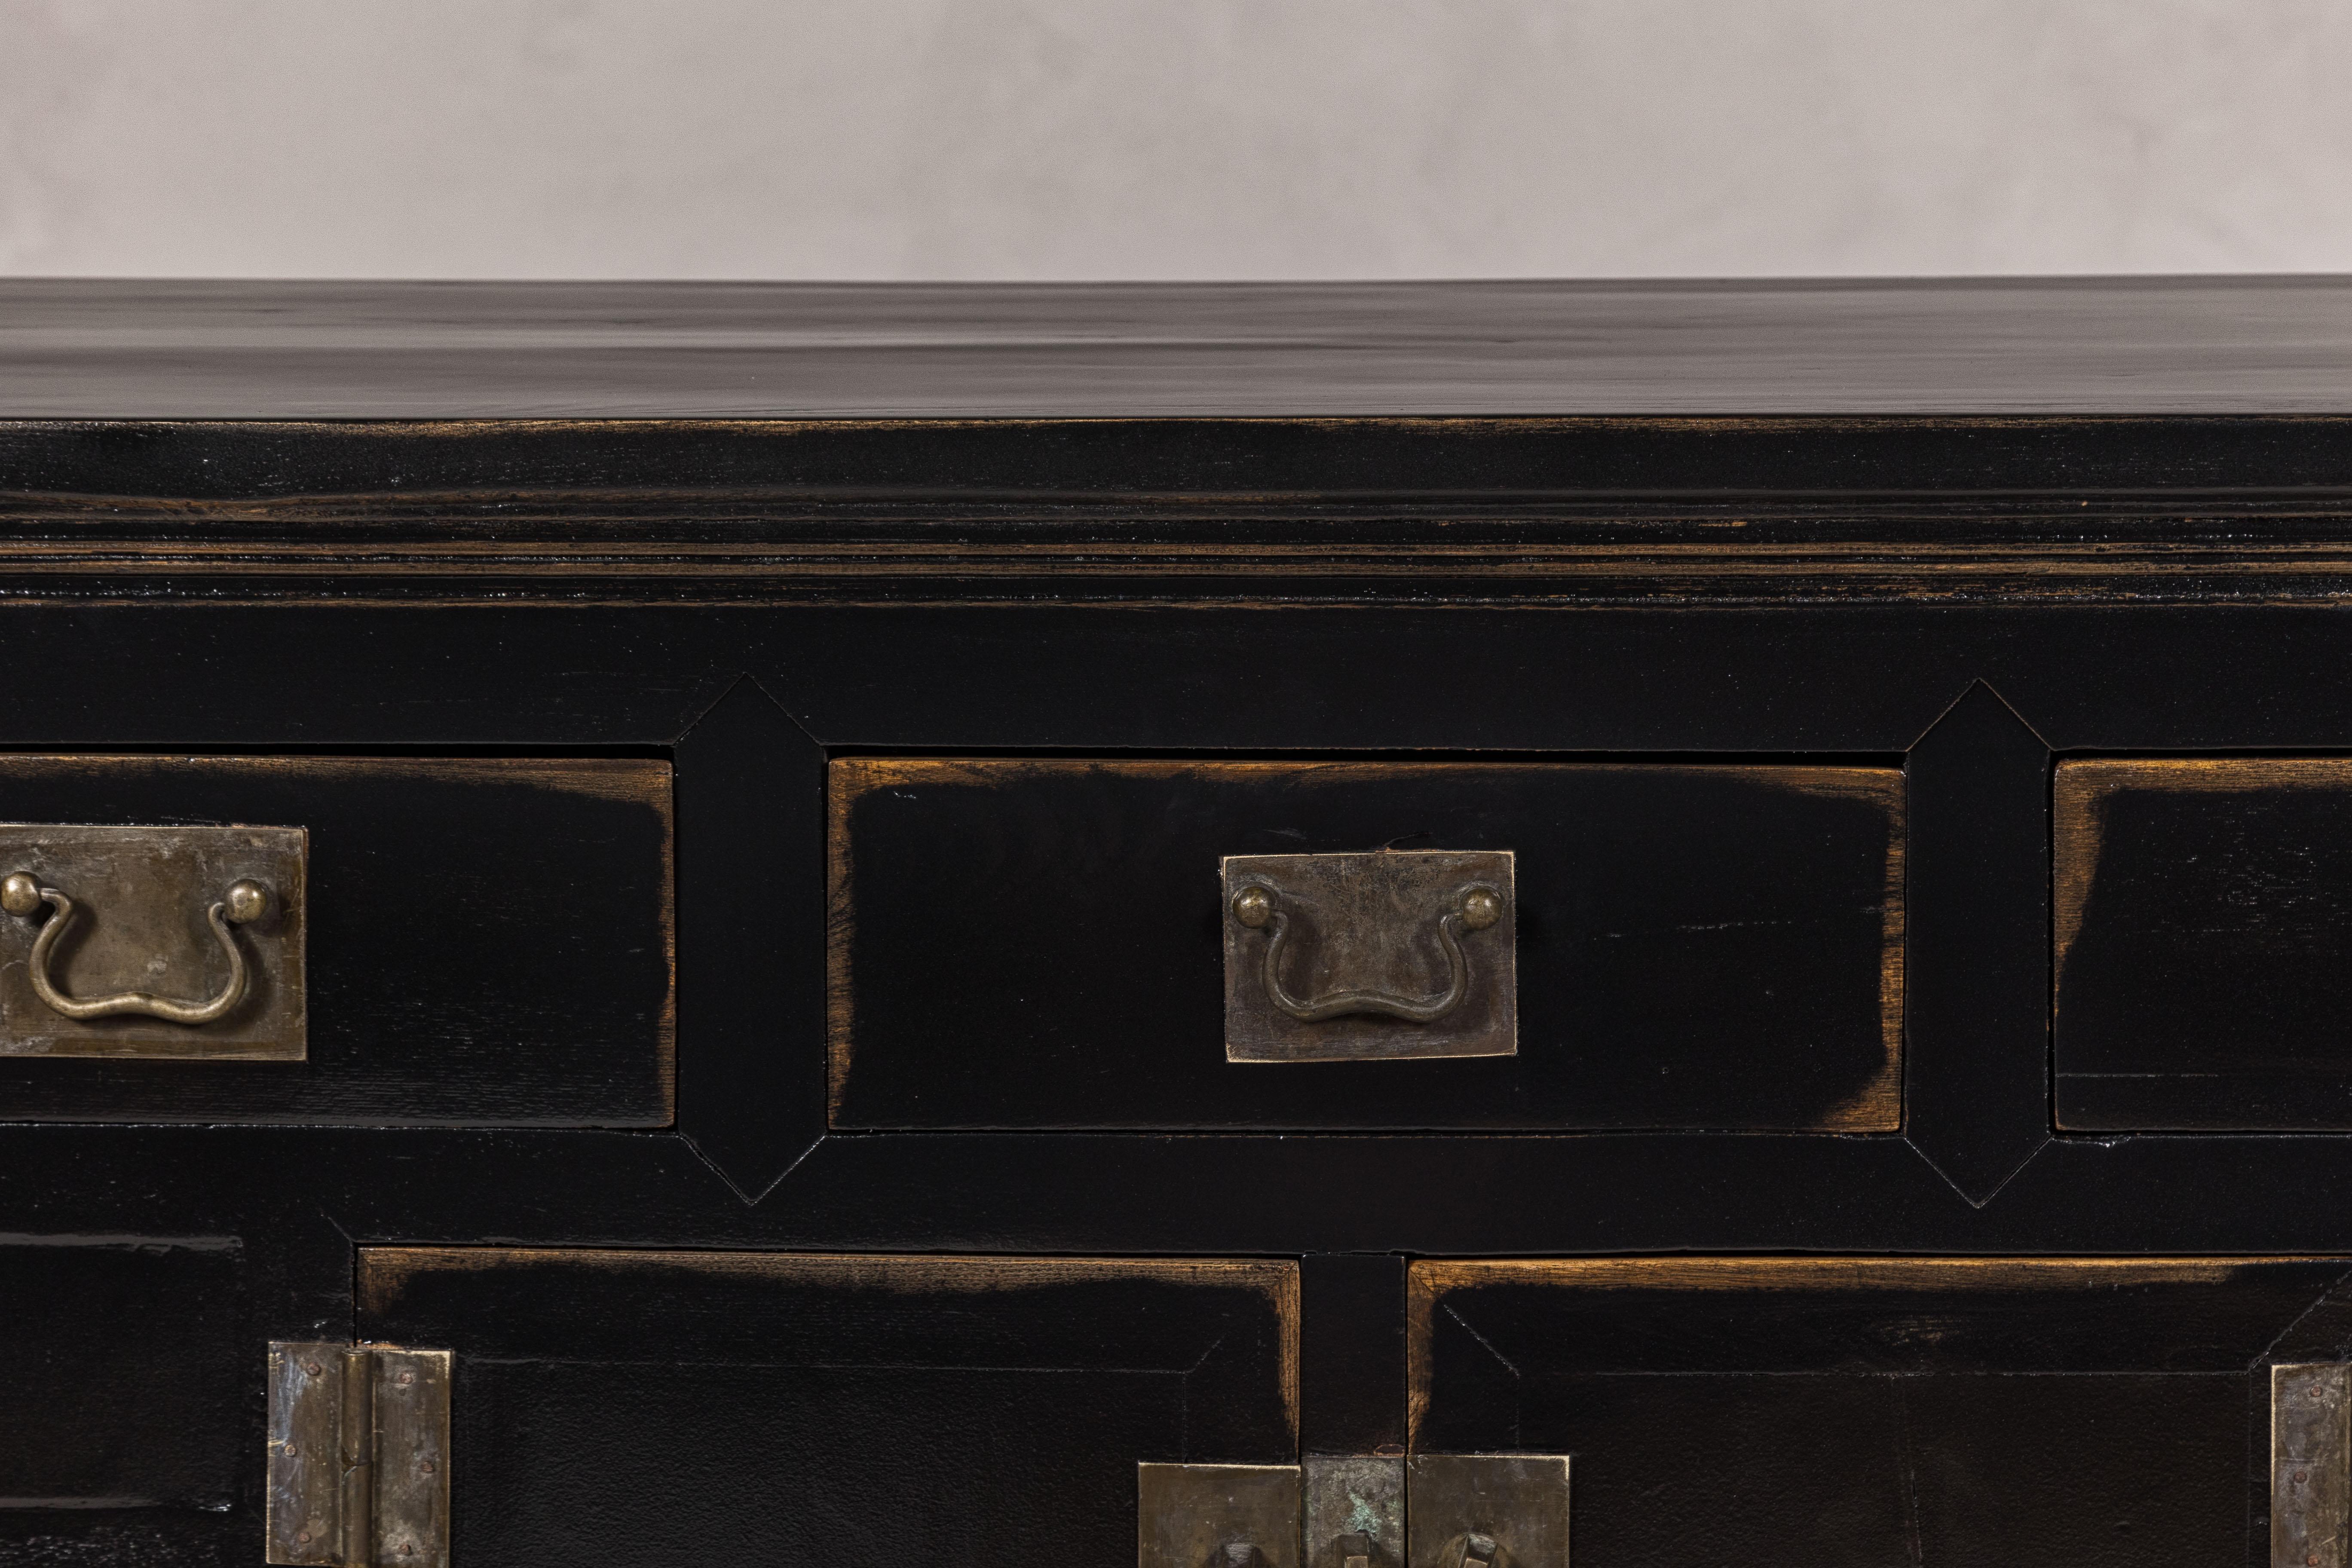 Black Lacquer Sideboard with Rubbed Edges, Brass Hardware, Doors and Drawers In Good Condition For Sale In Yonkers, NY